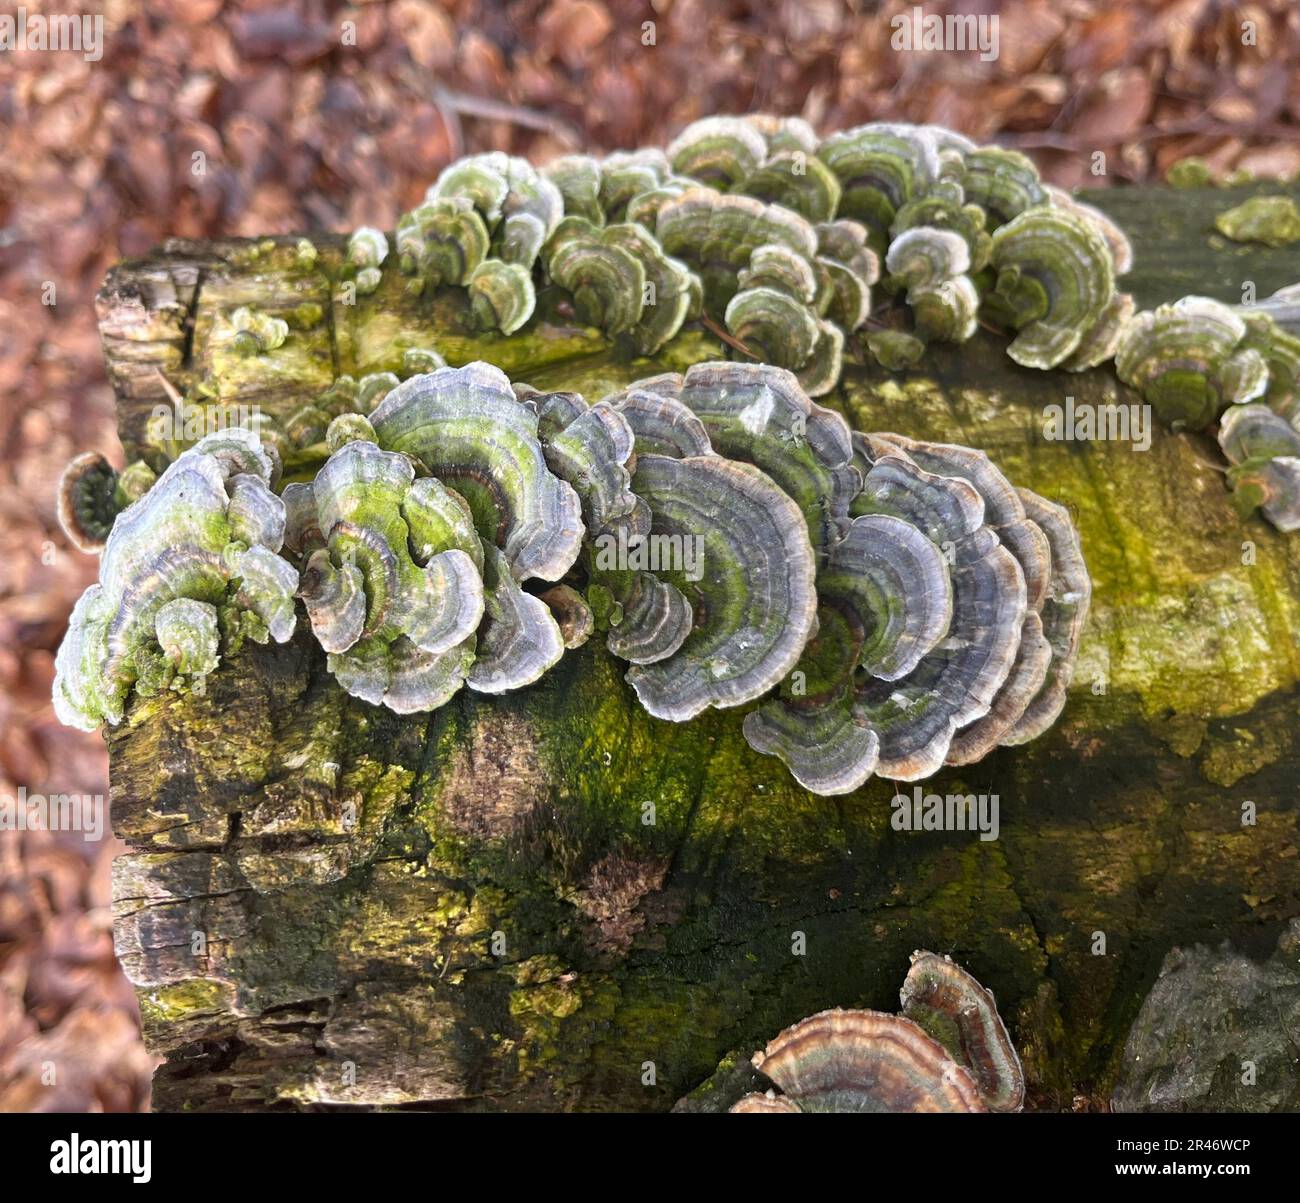 A wooden log with a variety of mushrooms growing on its surface Stock Photo